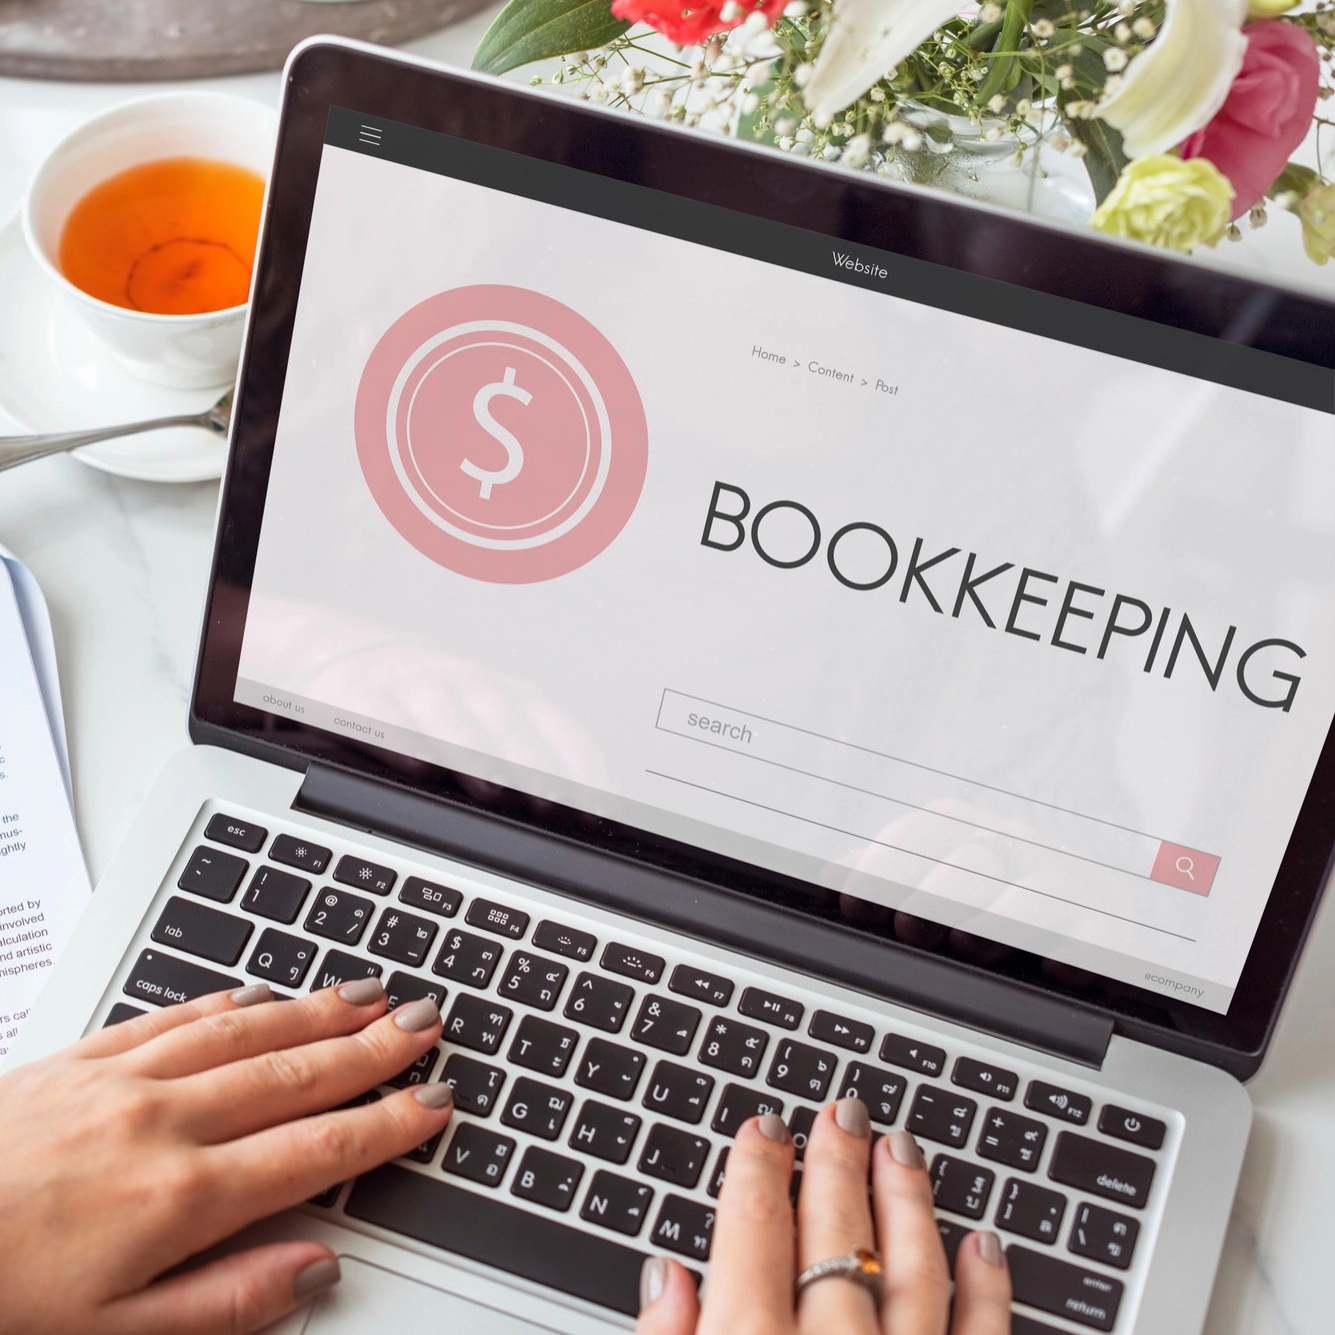 How Bookkeeping Software Can Benefit Companies in Zambia